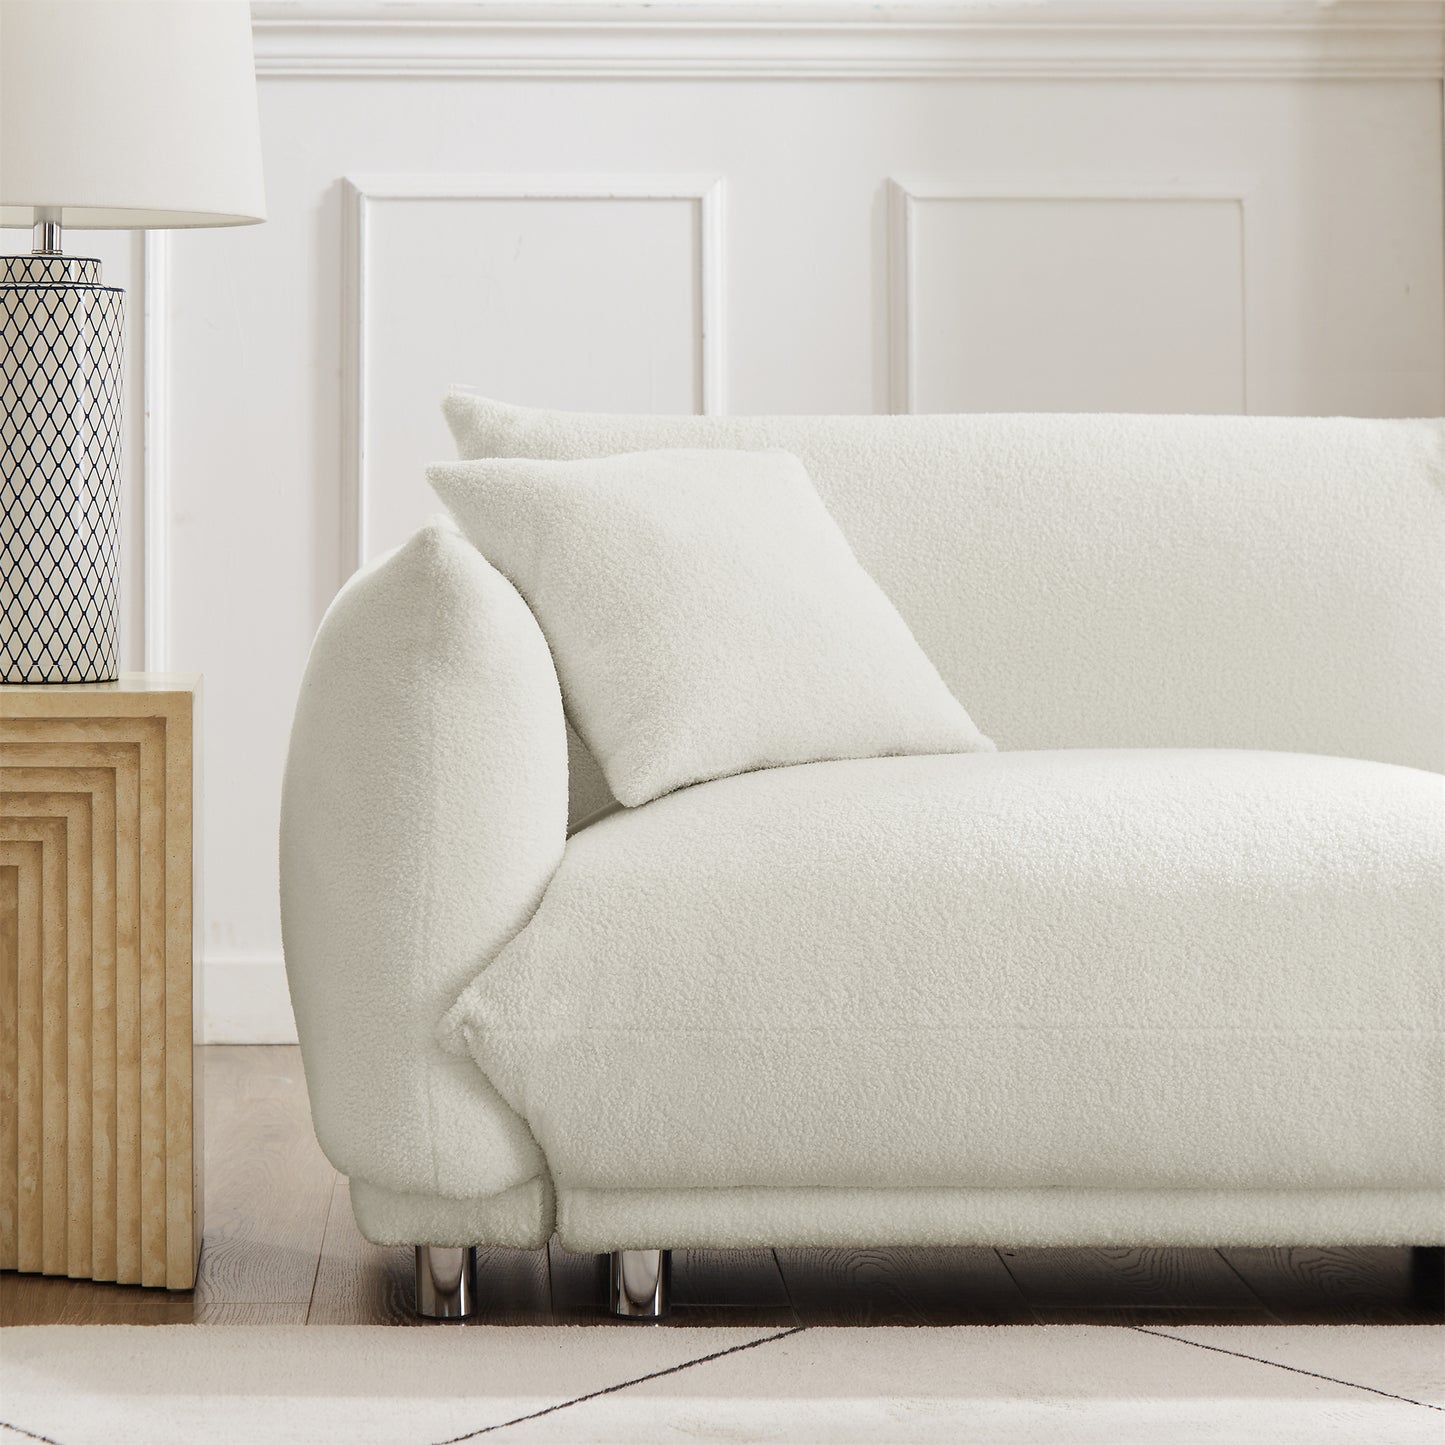 A lovable, fat, bread-like sofa with 2 pillows and metal feet with anti-skid pads